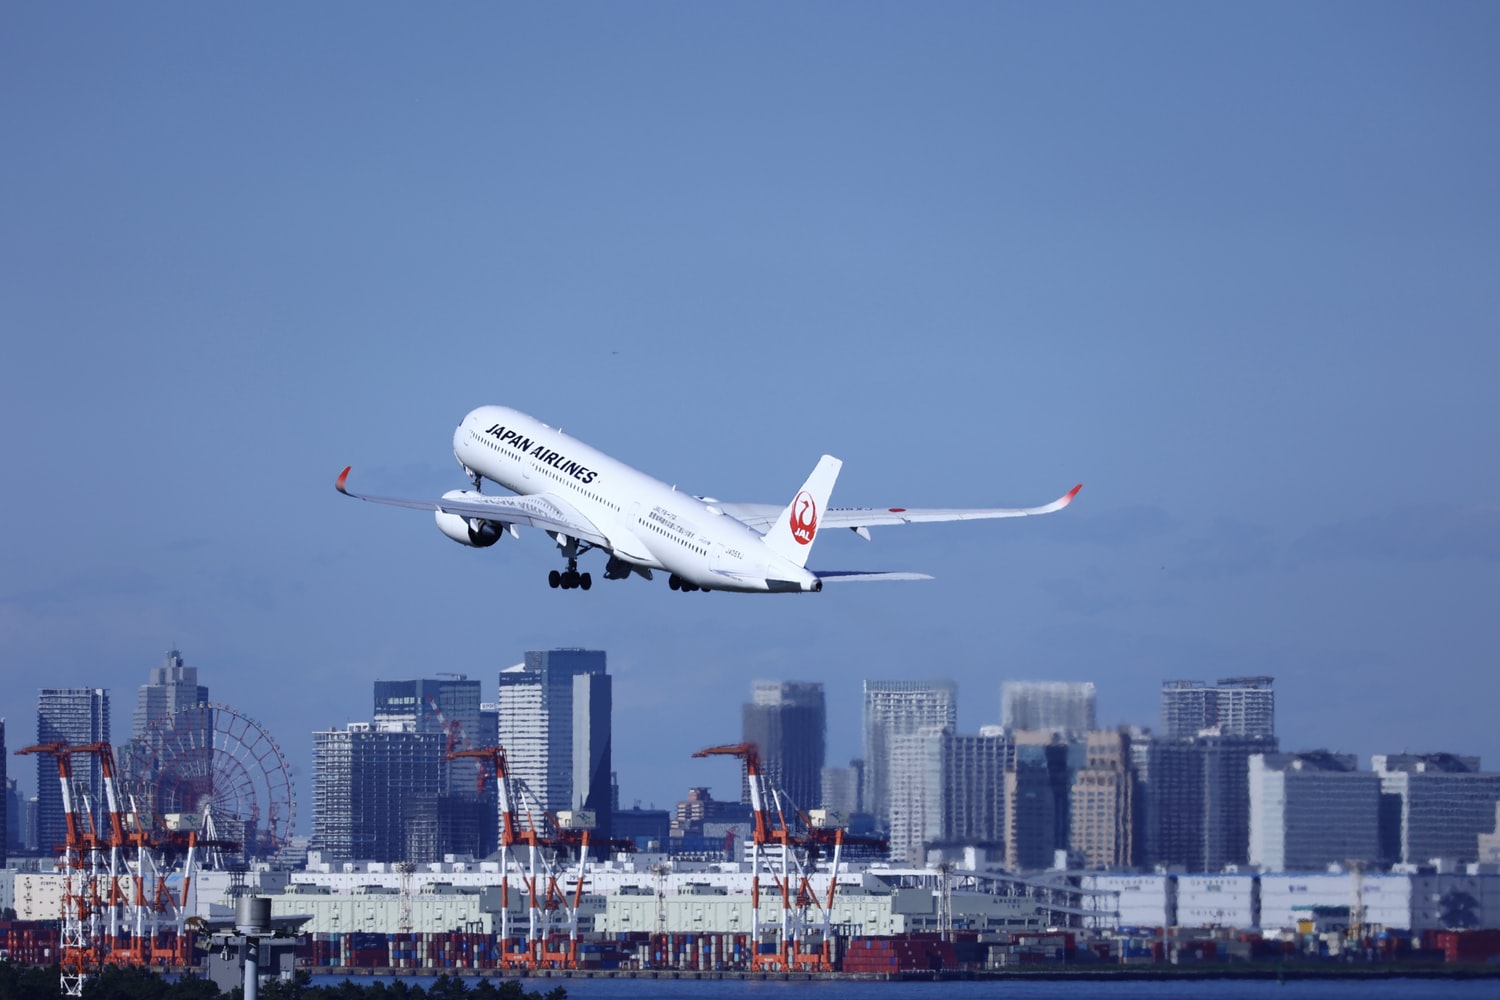 Japan Airlines earns awards for unparalleled health and safety measures